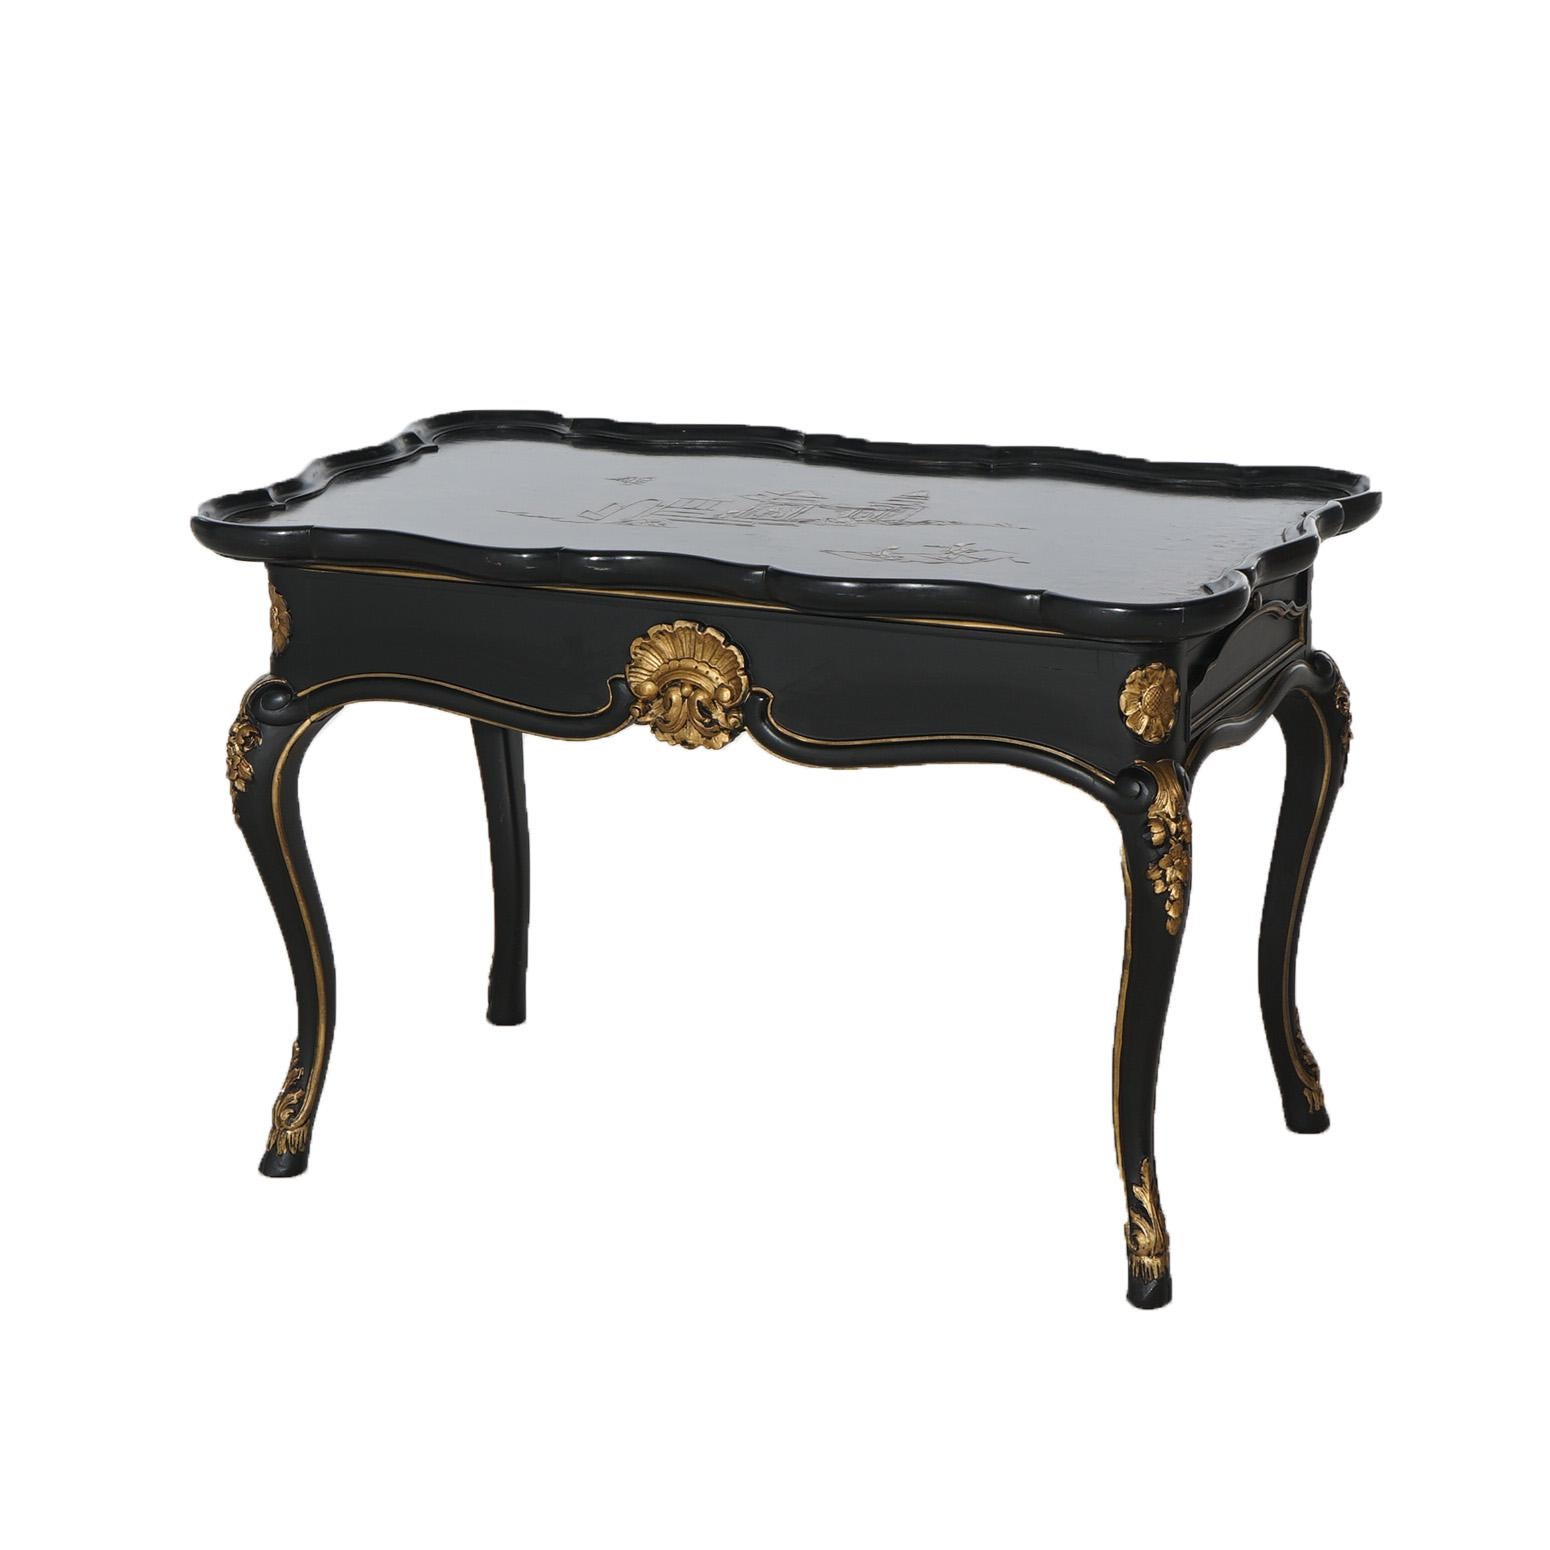  Antique French Style Chinoiserie Gilt Decorated Ebonized Low Tea Table C1930 1